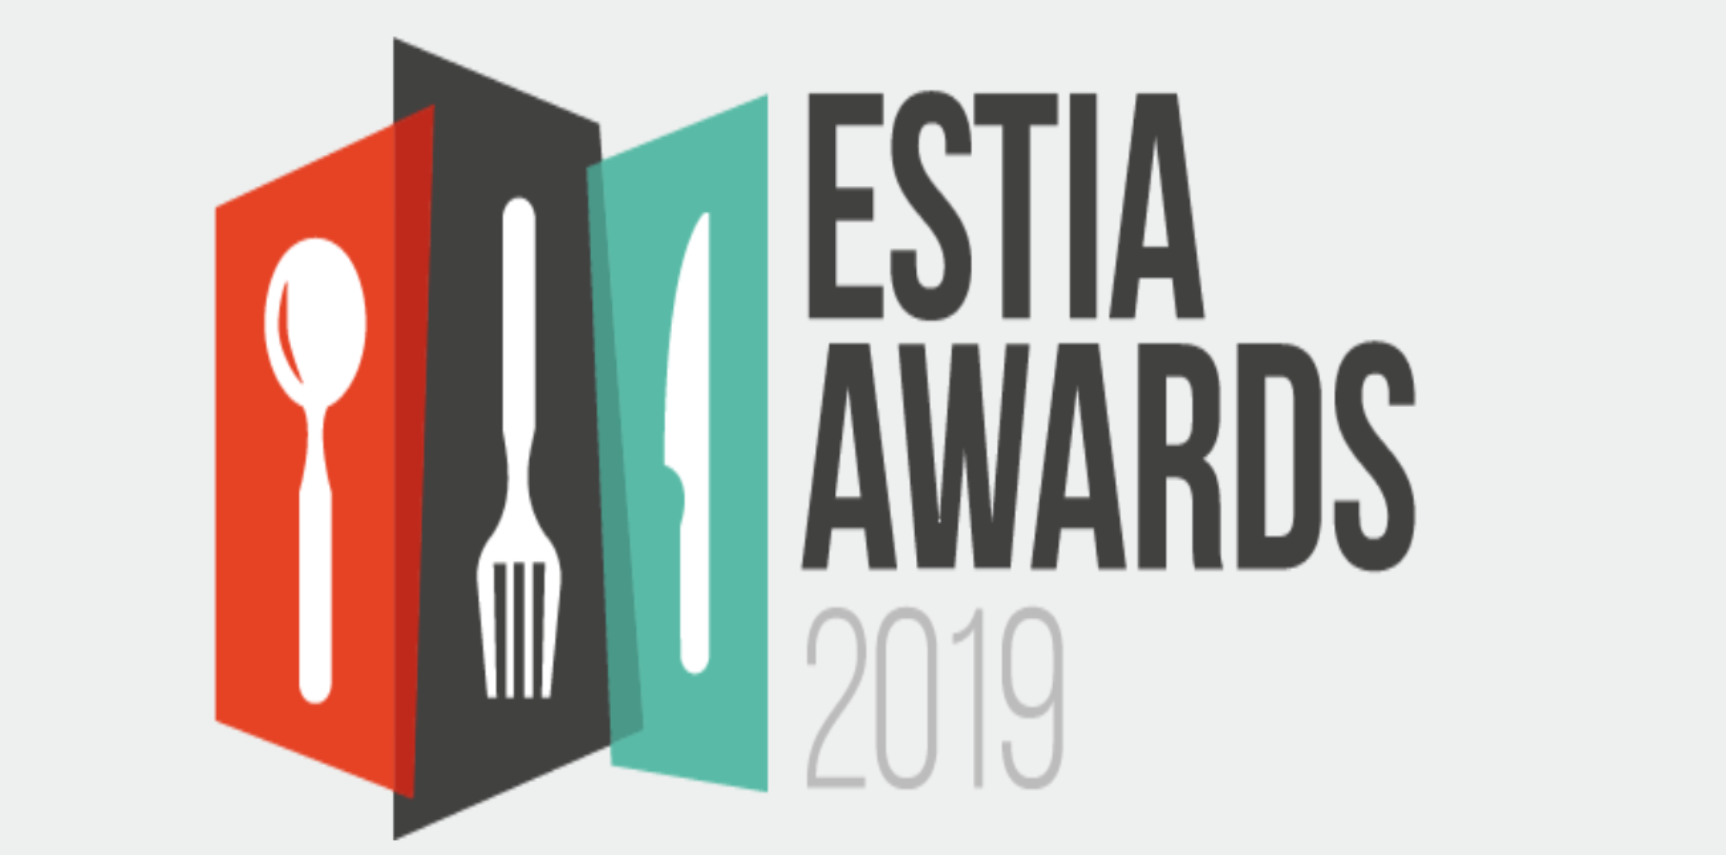 Estia Awards 2019: Who’s the best in town